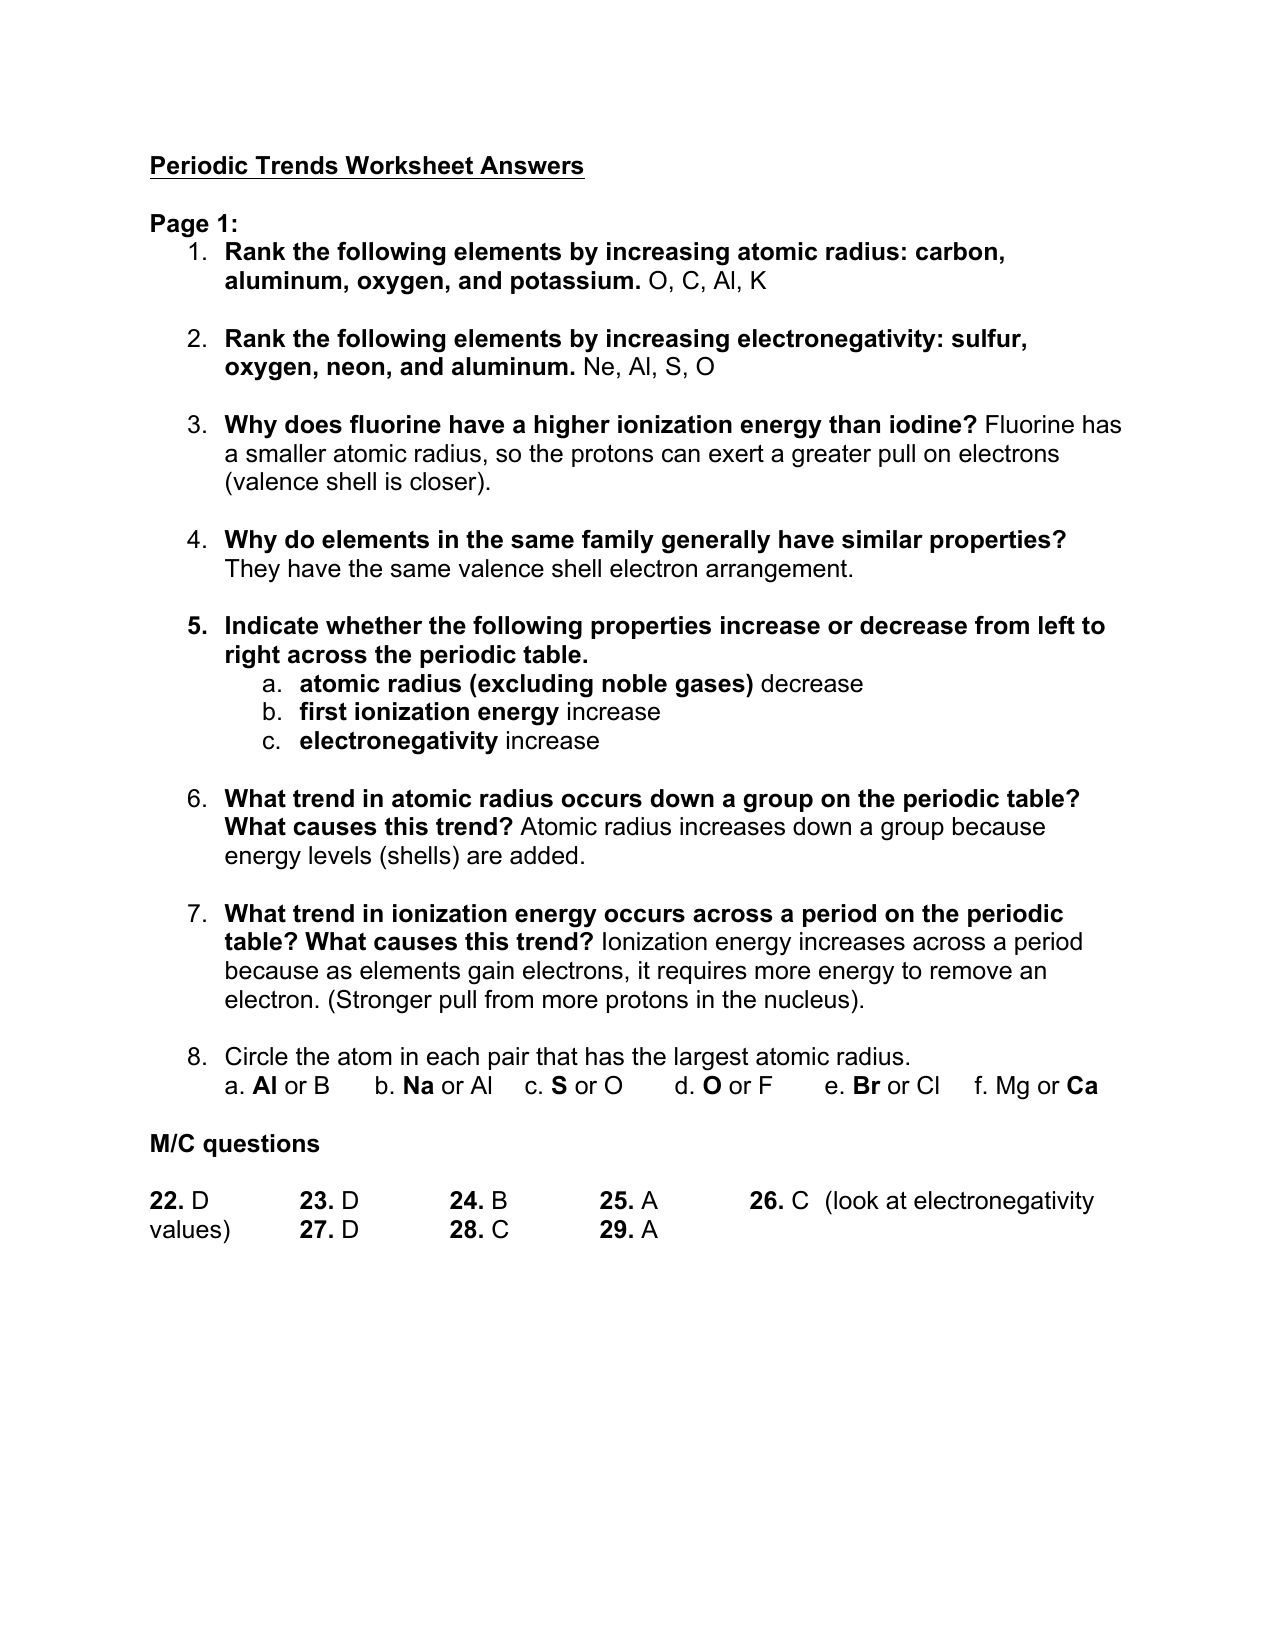 Periodic Trends Worksheet Answers Page 221: 221. Rank the following Throughout Worksheet Periodic Table Trends